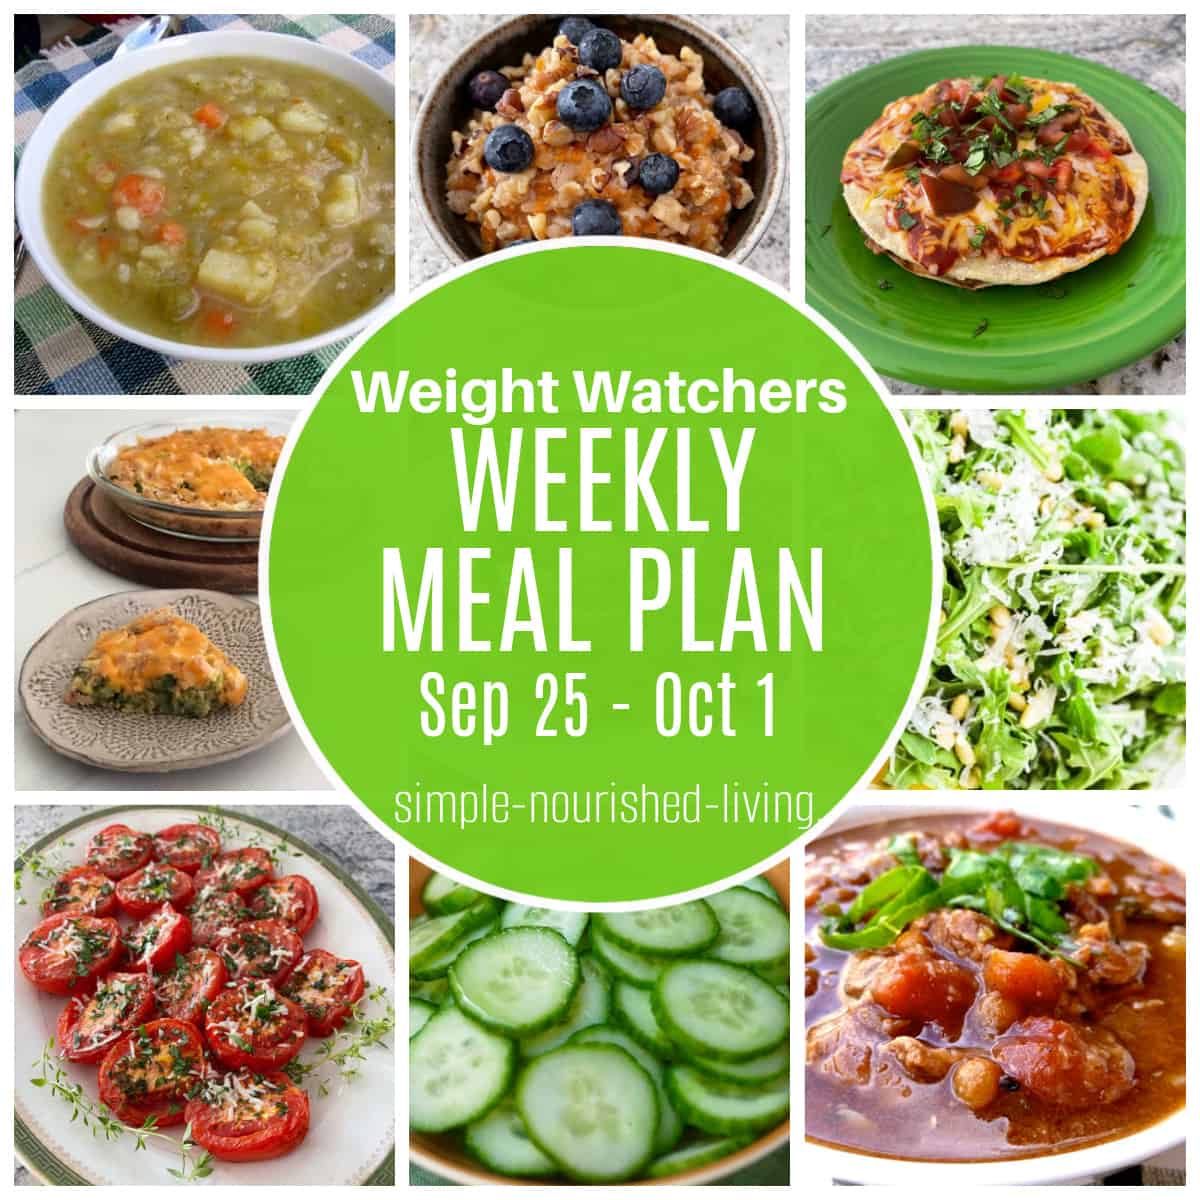 Collage of food including carrot cake oatmeal for one, skillet Mexican pizza, broiled Parmesan tomatoes and broccoli cheddar pie with text in green circle that reads Weight Watchers Weekly Meal Plan September 25 - October 1.